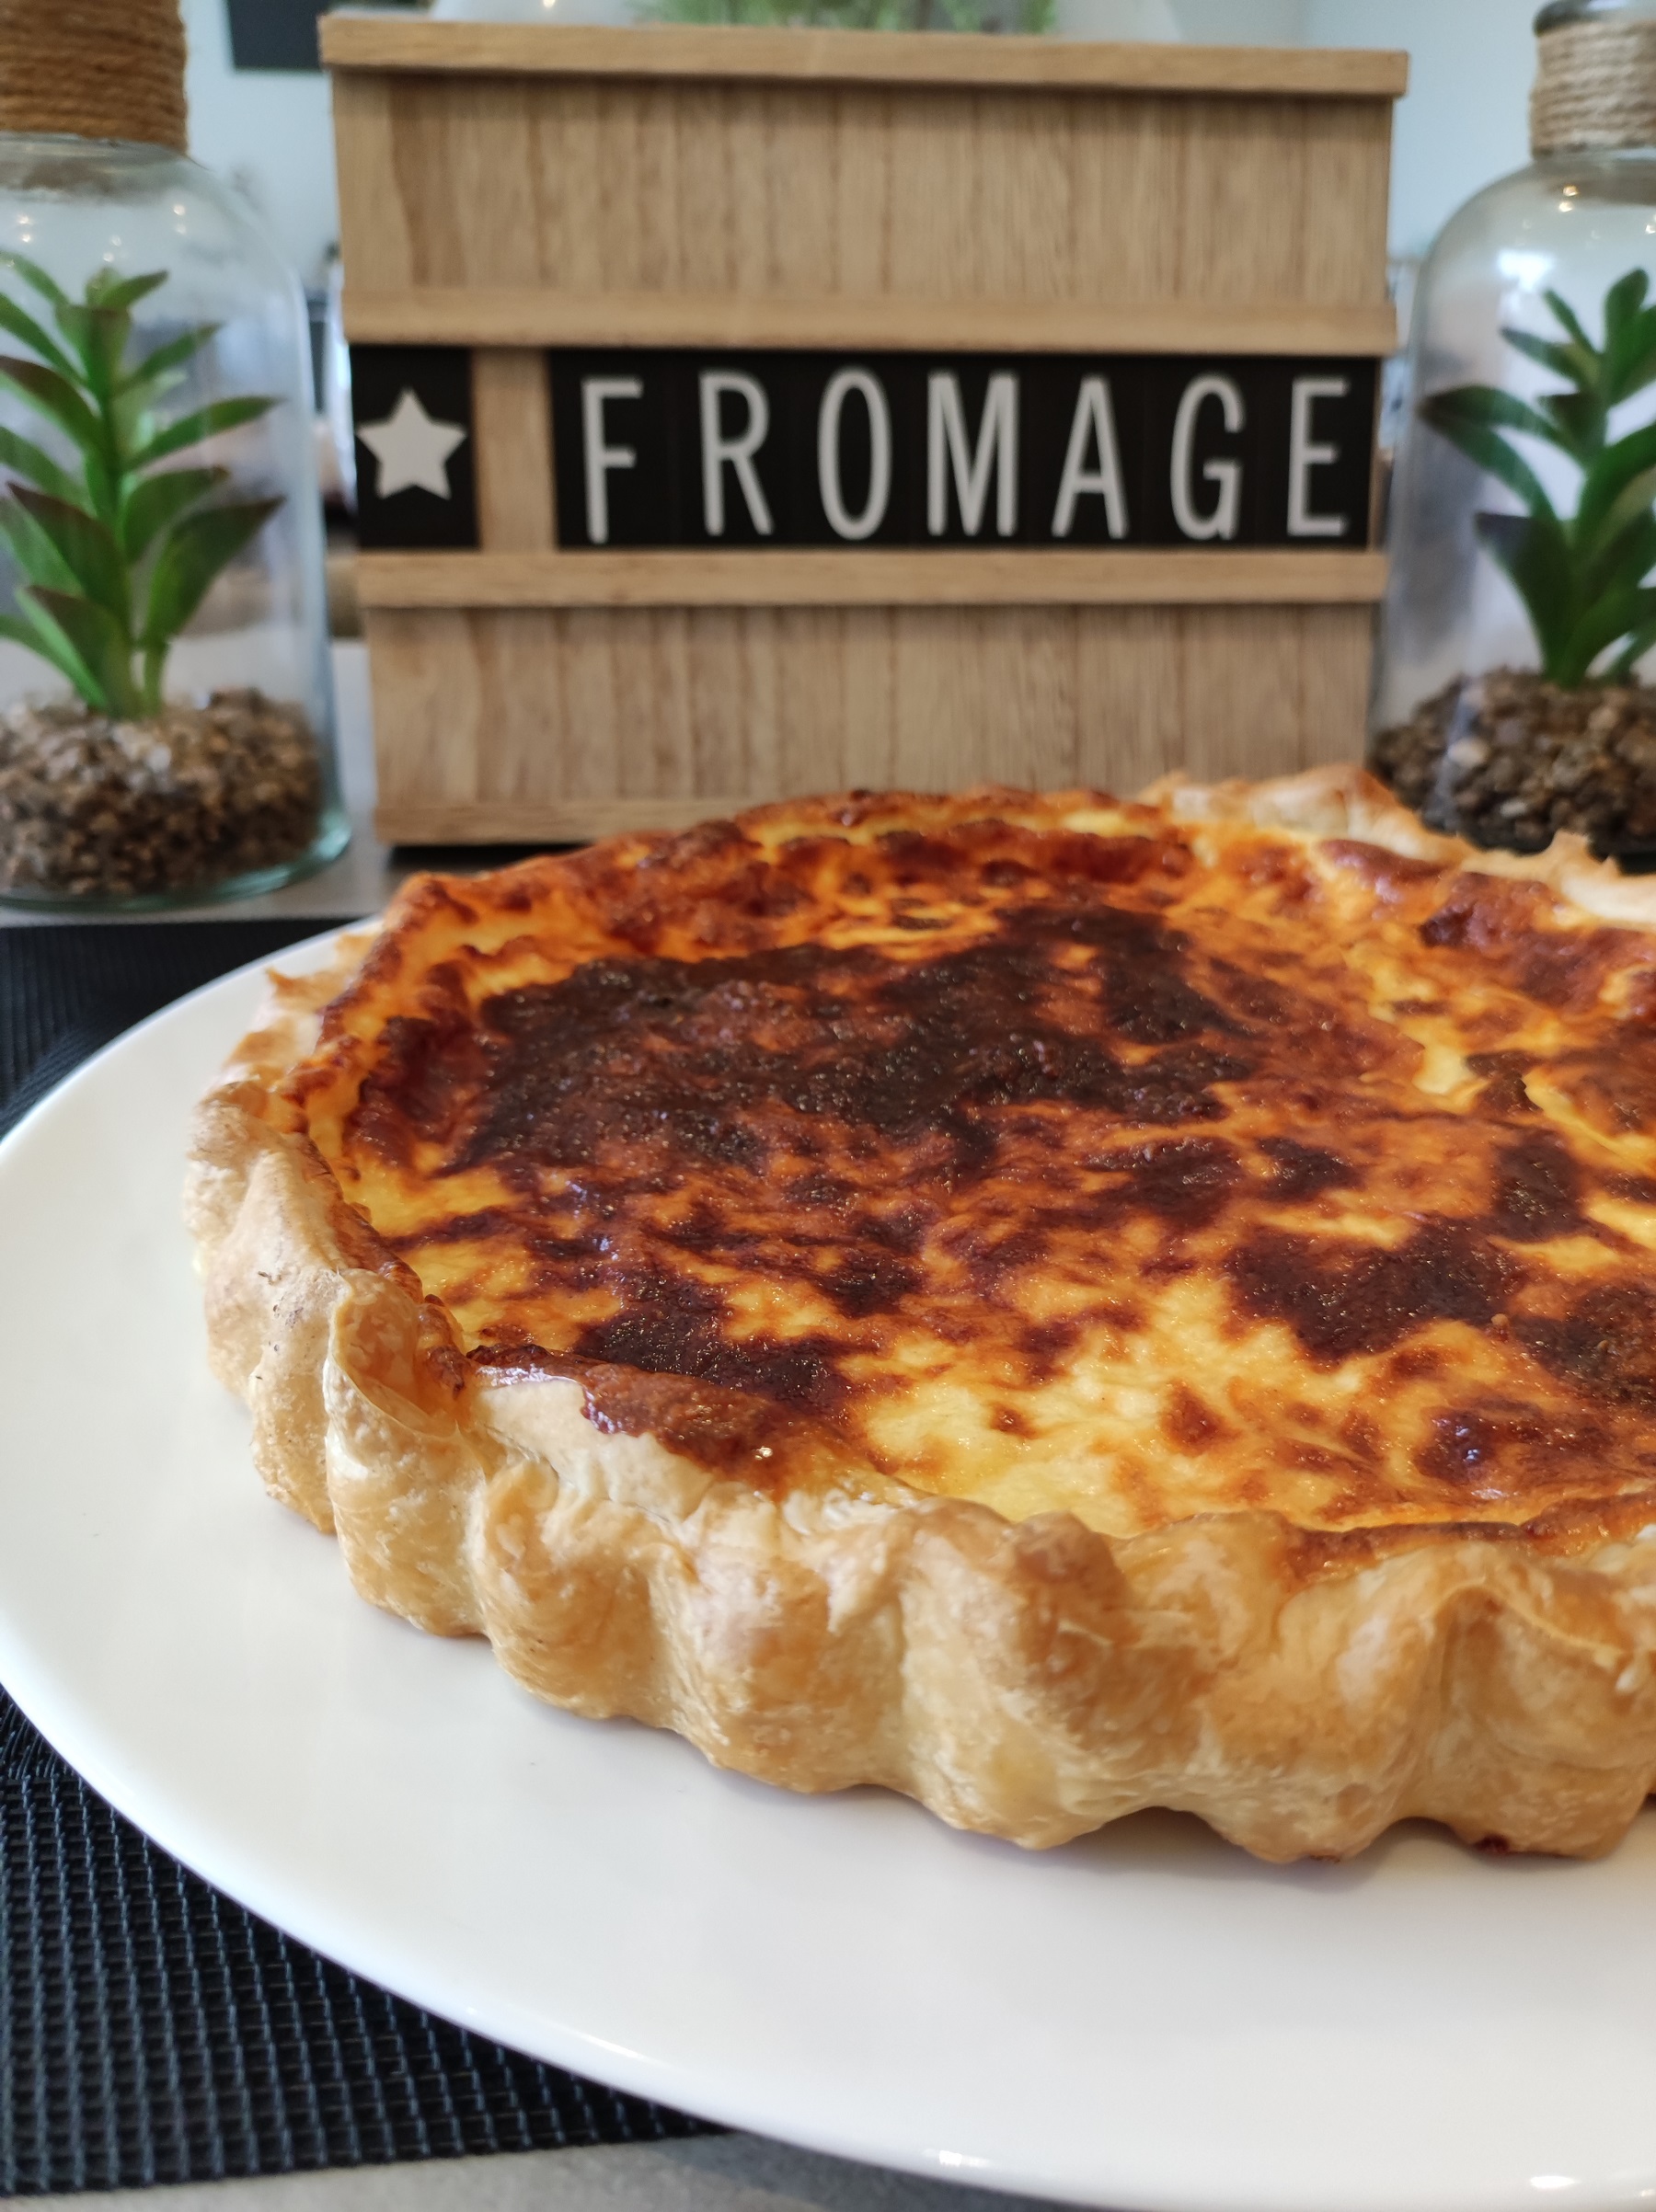 TARTE AUX FROMAGES